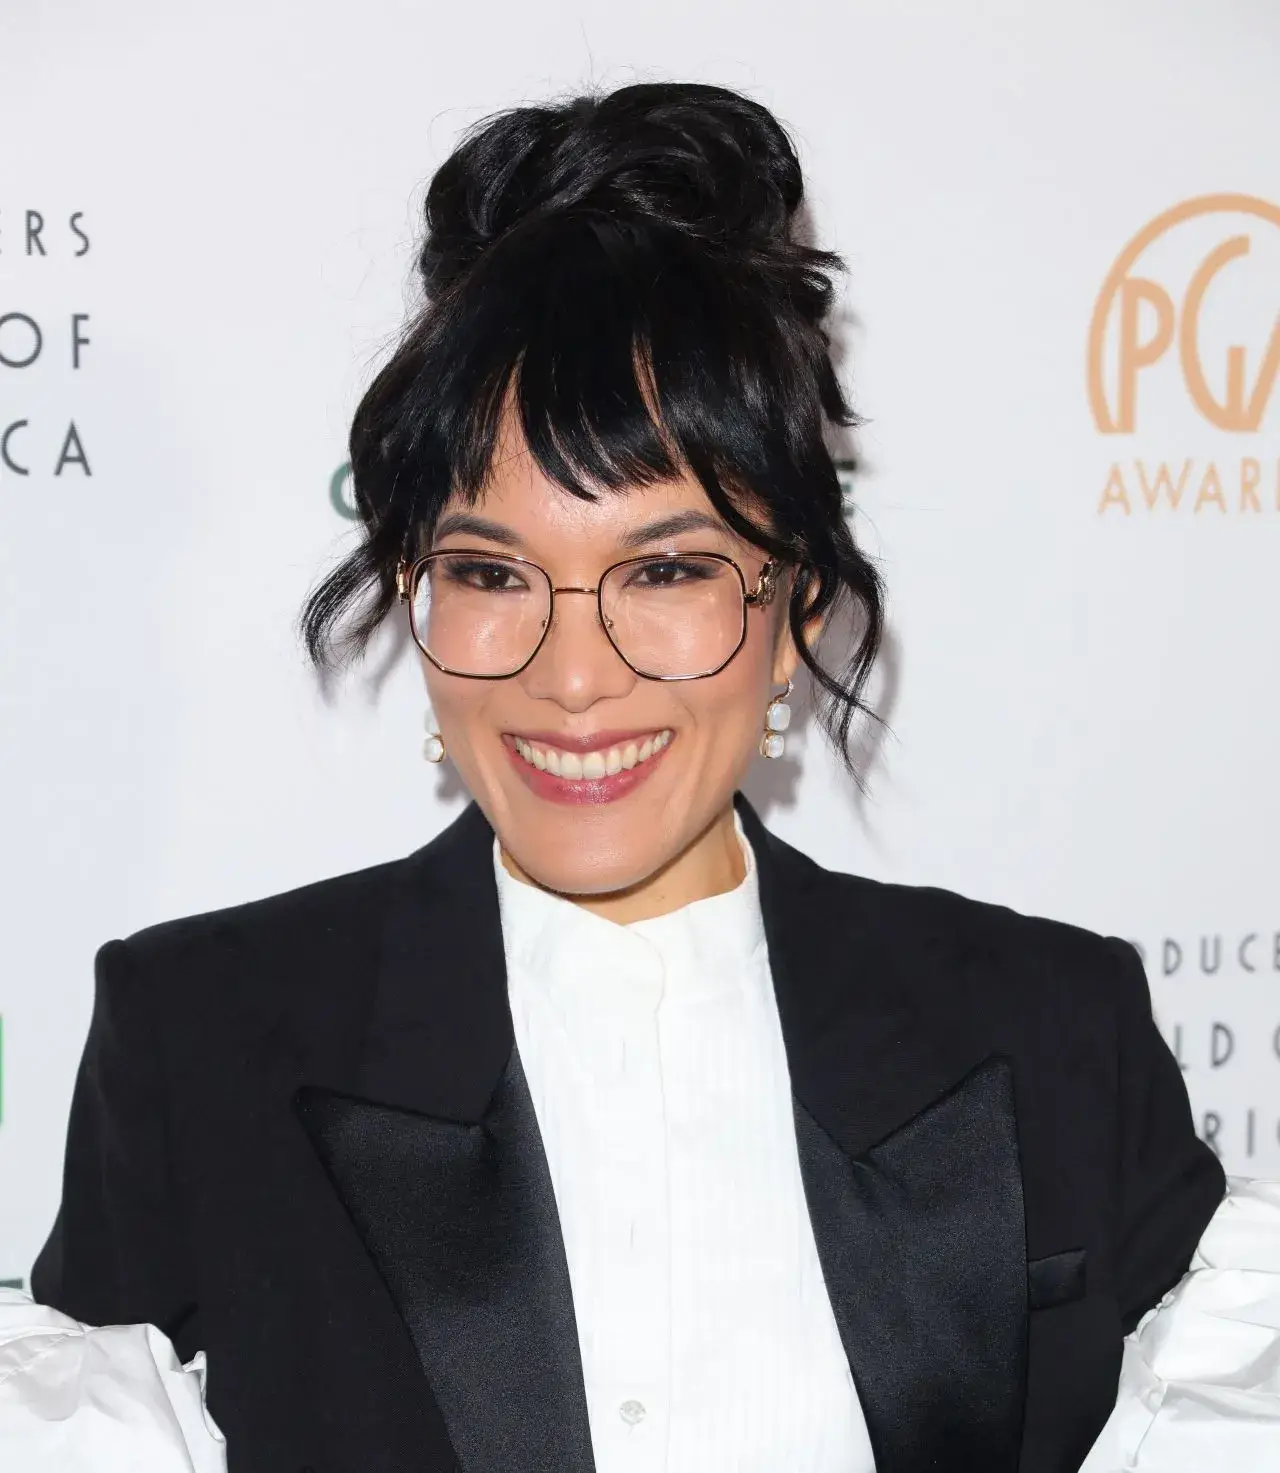 ALI WONG PHOTOSHOOT AT PRODUCERS GUILD AWARDS IN LOS ANGELES 2